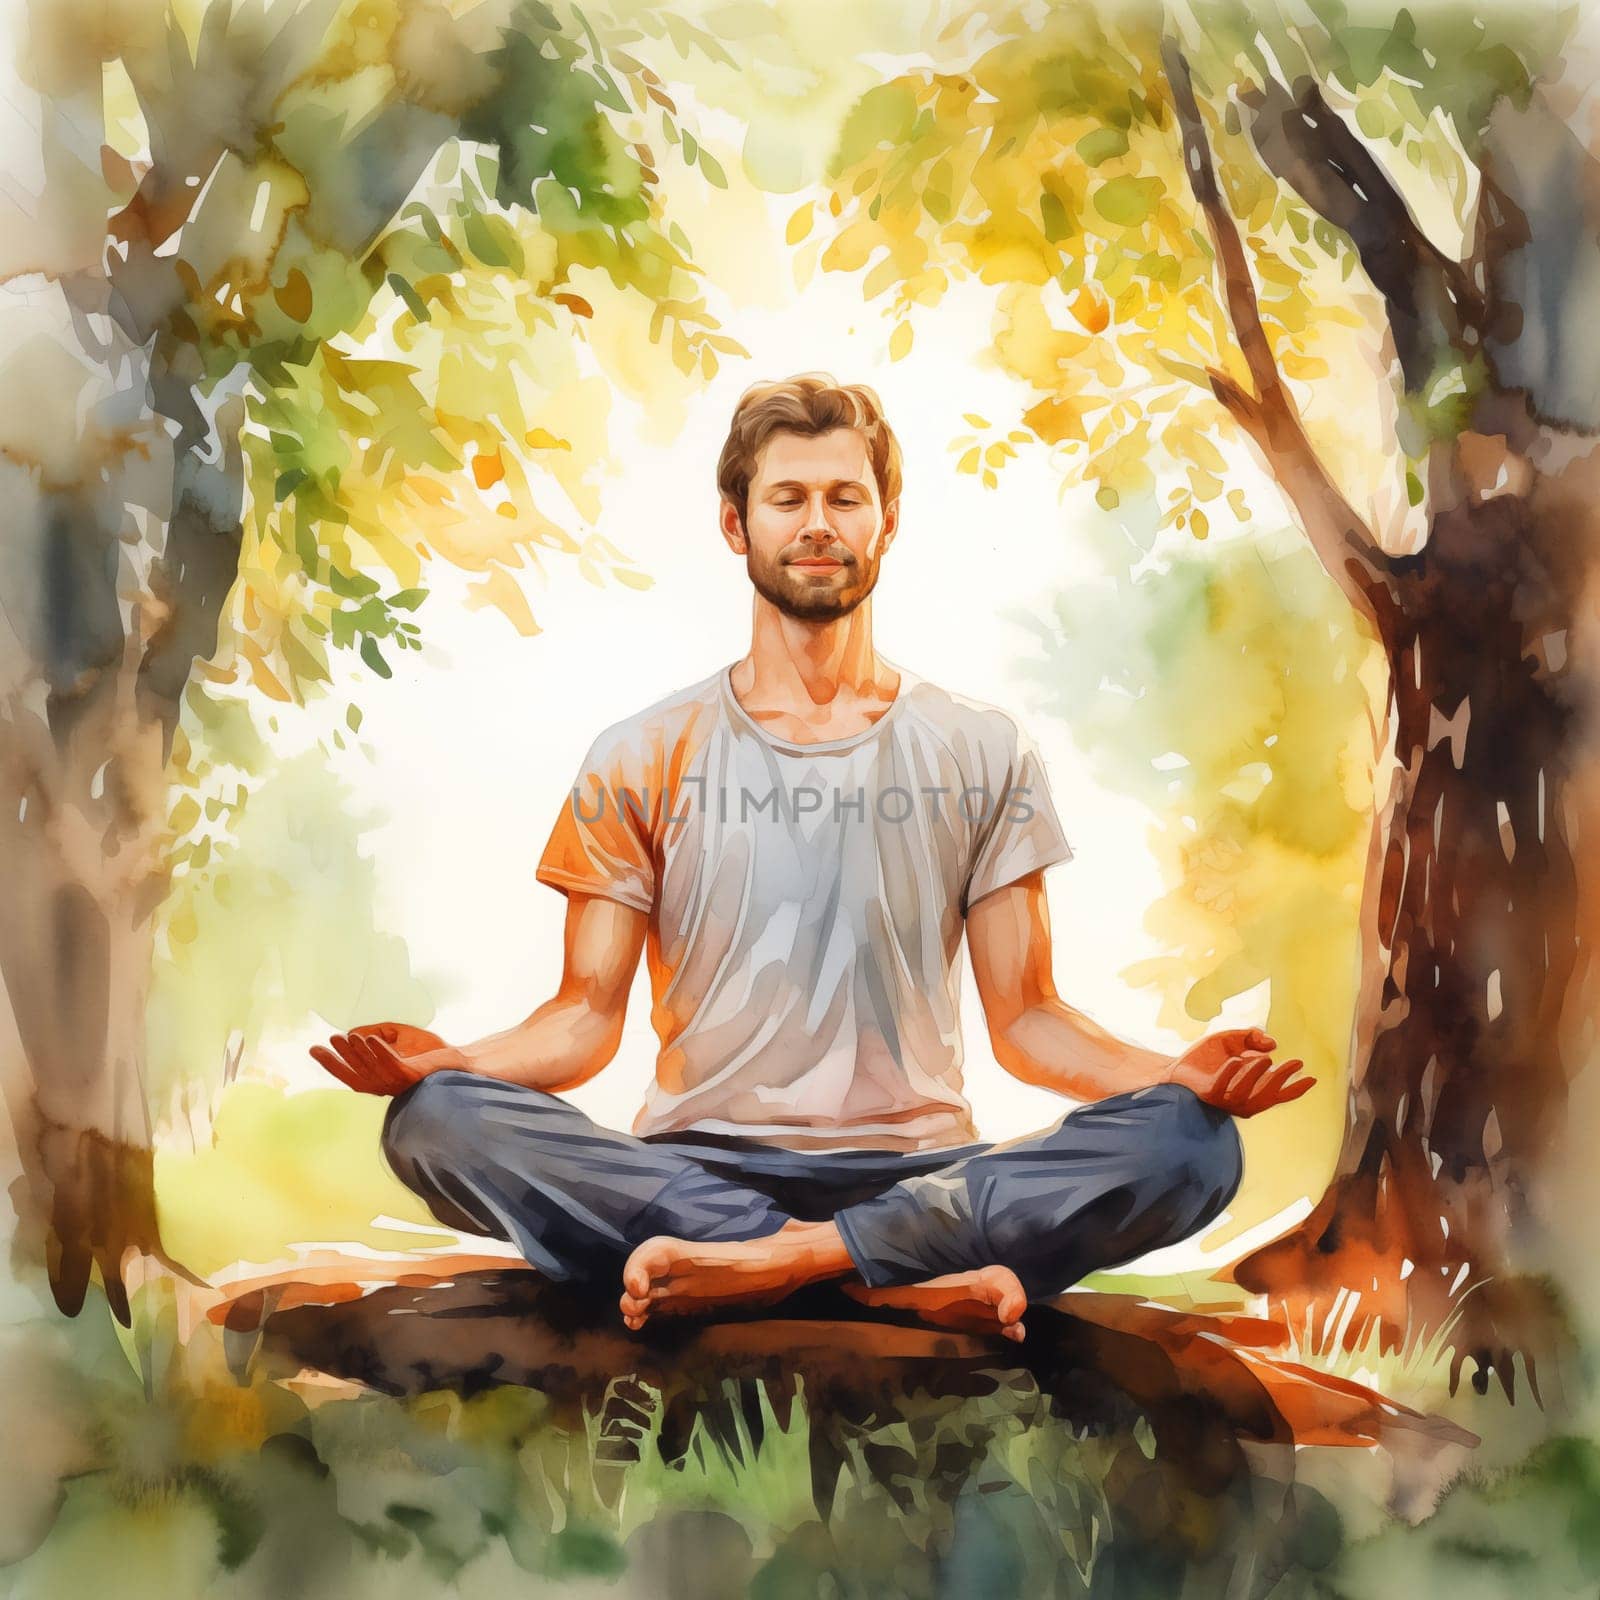 An adult man sitting on the grass surrounded by trees in nature, with his eyes closed in meditation. Summer, captured in watercolor, evokes tranquility and connection with nature. by veronawinner